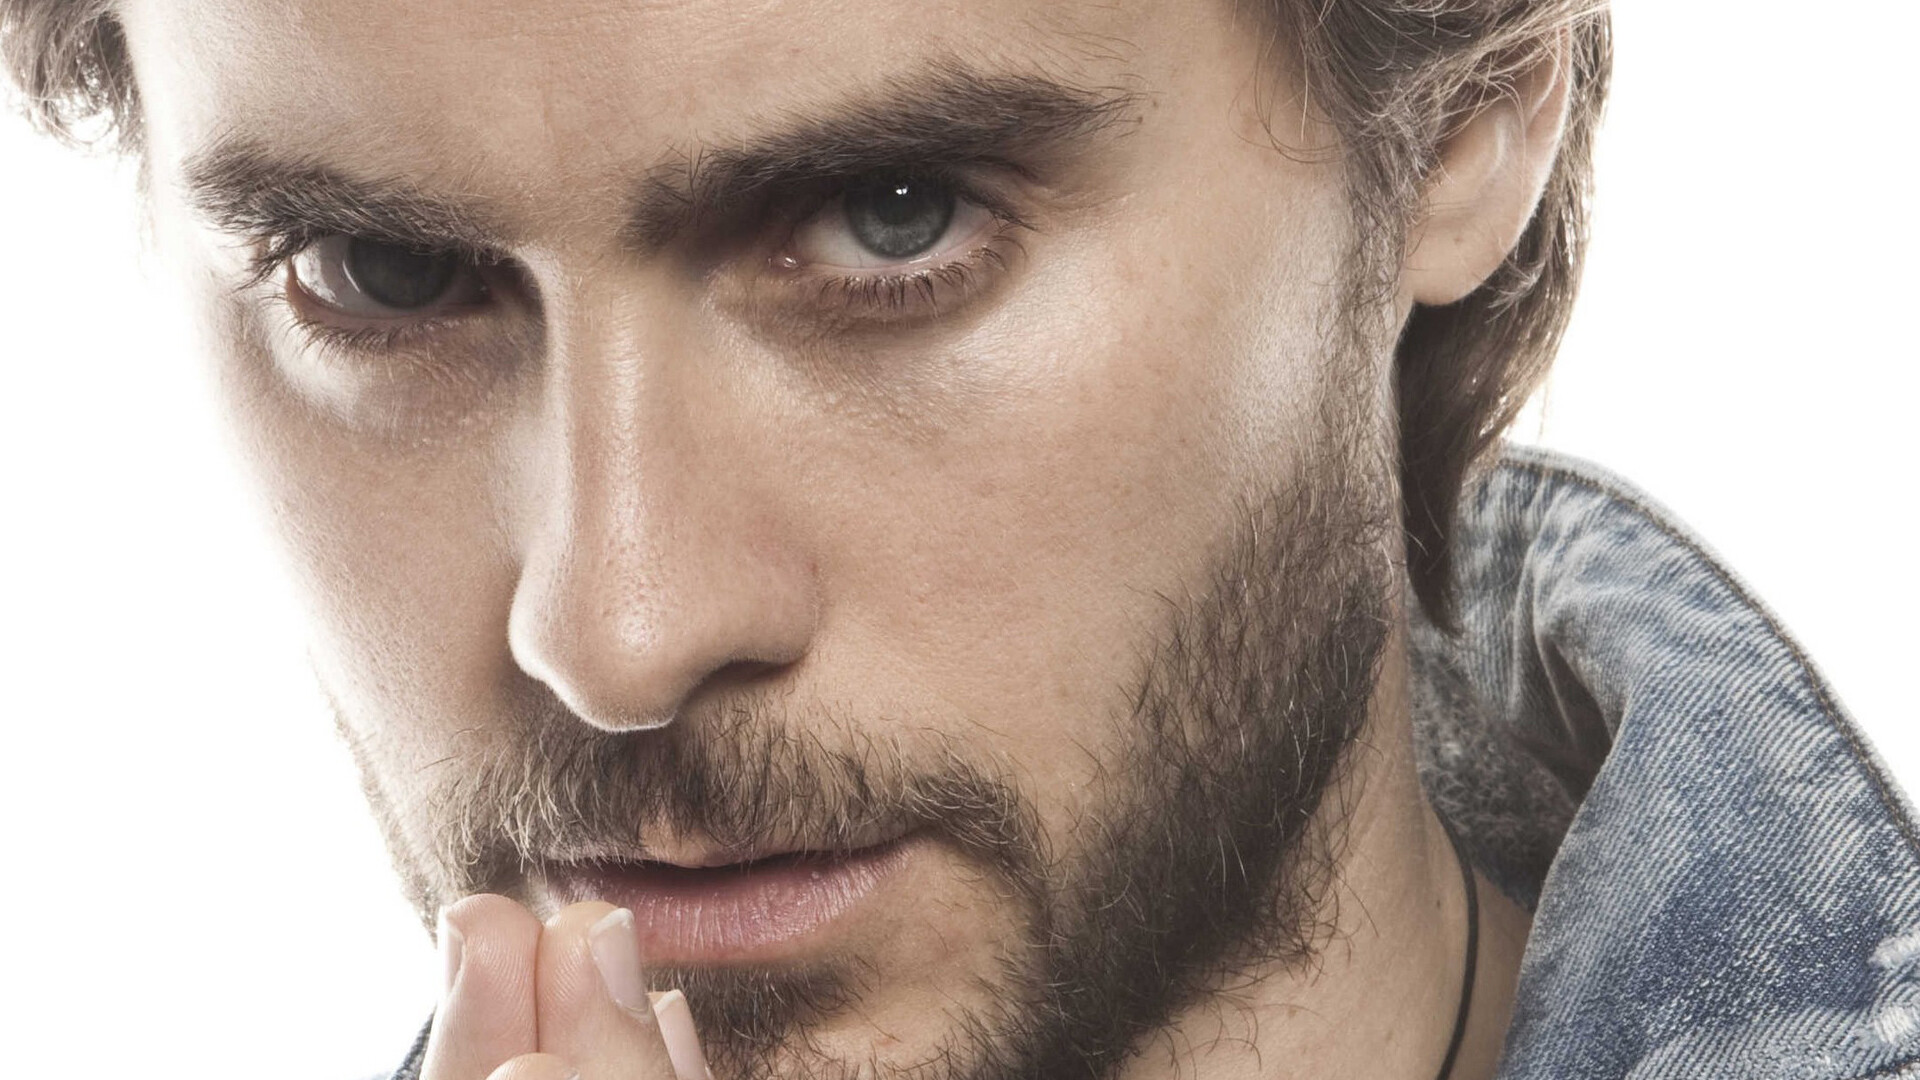 Jared Leto: Dallas Buyers Club, Received an Academy Award for best supporting actor. 1920x1080 Full HD Wallpaper.